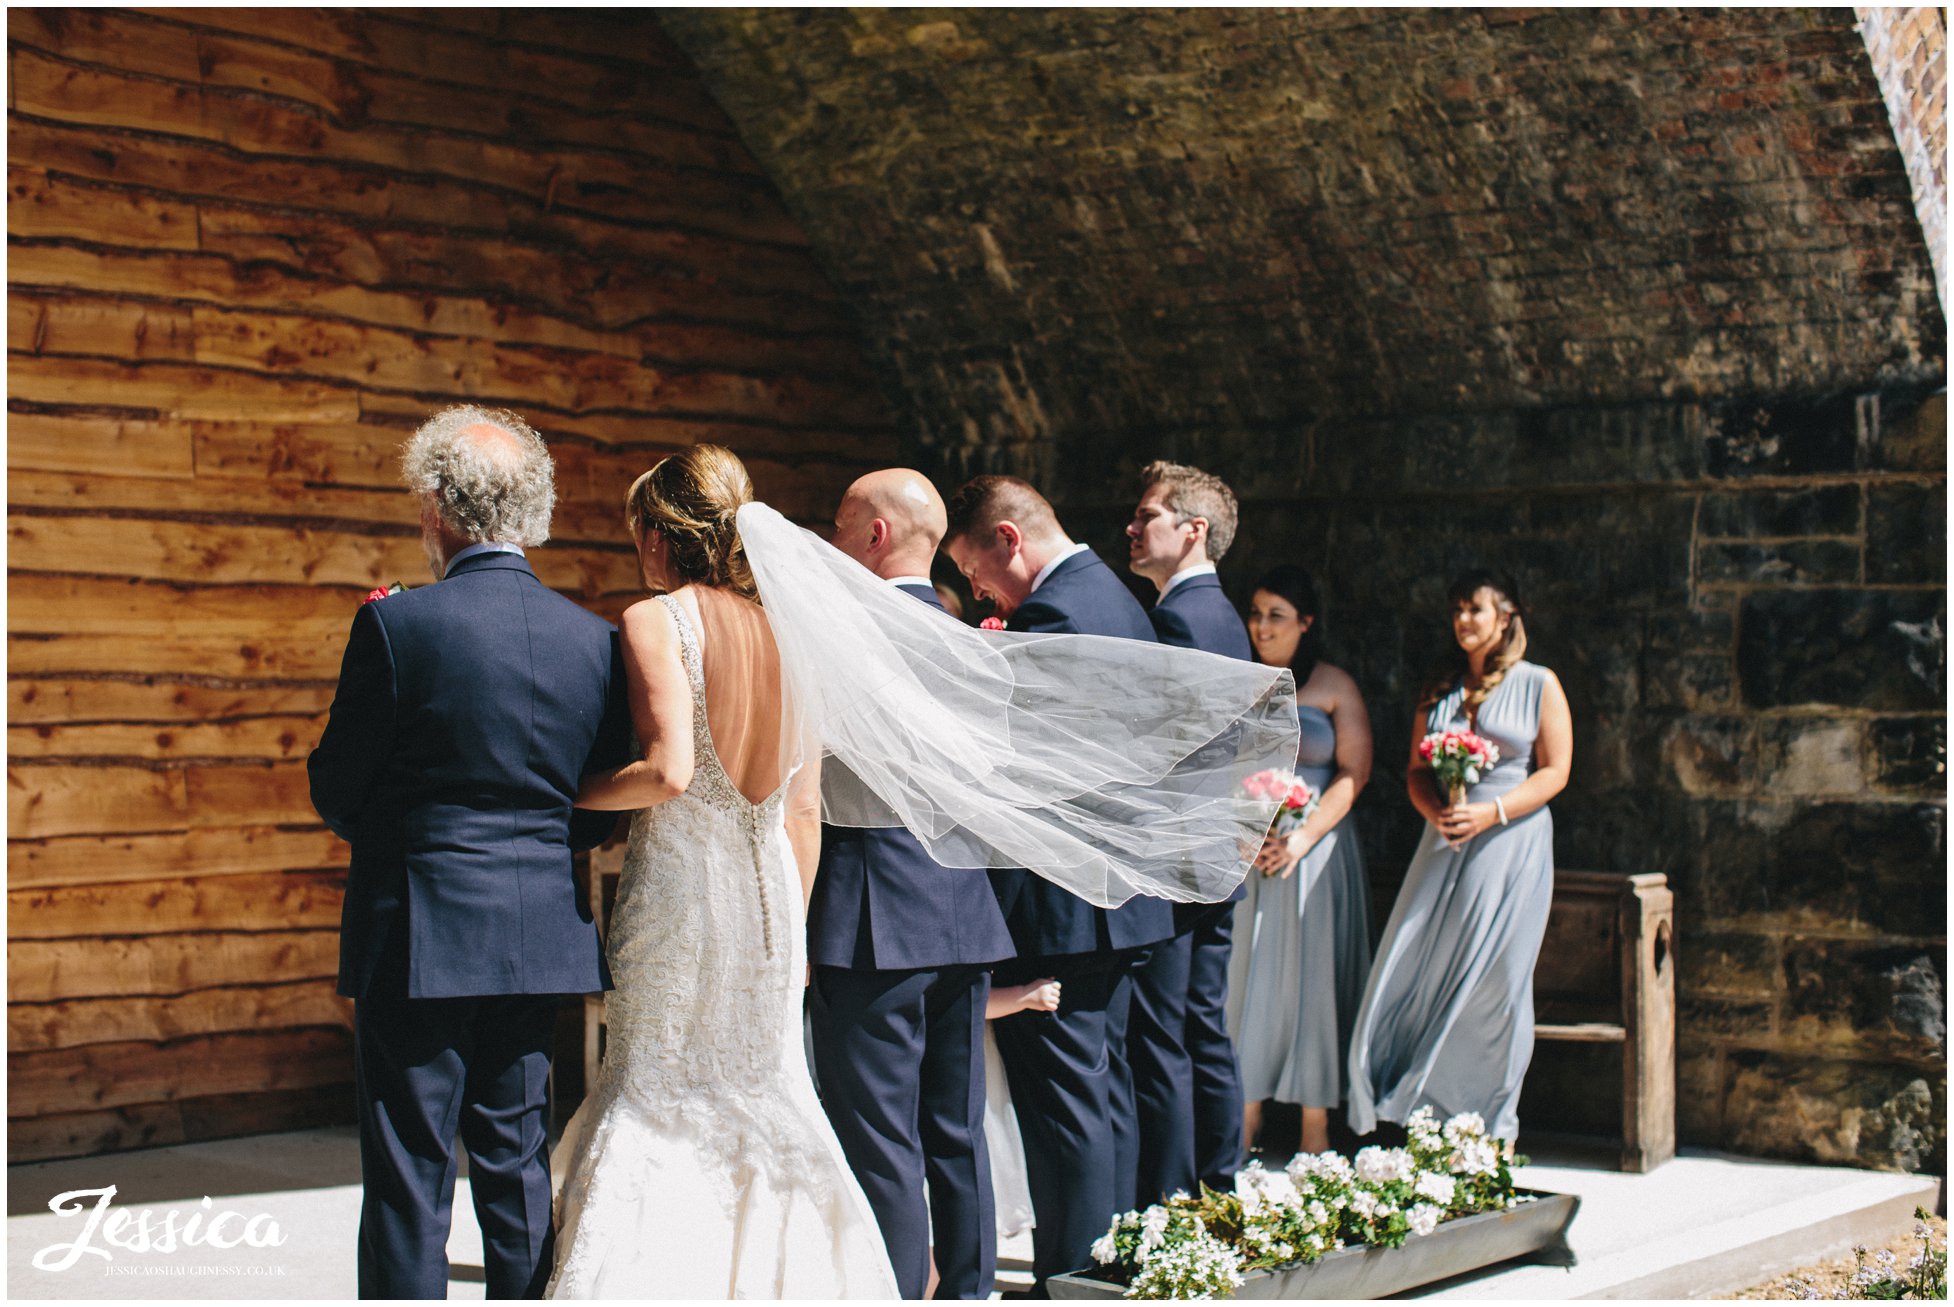 bride links arms with her father during the ceremony at her tower hill barns wedding